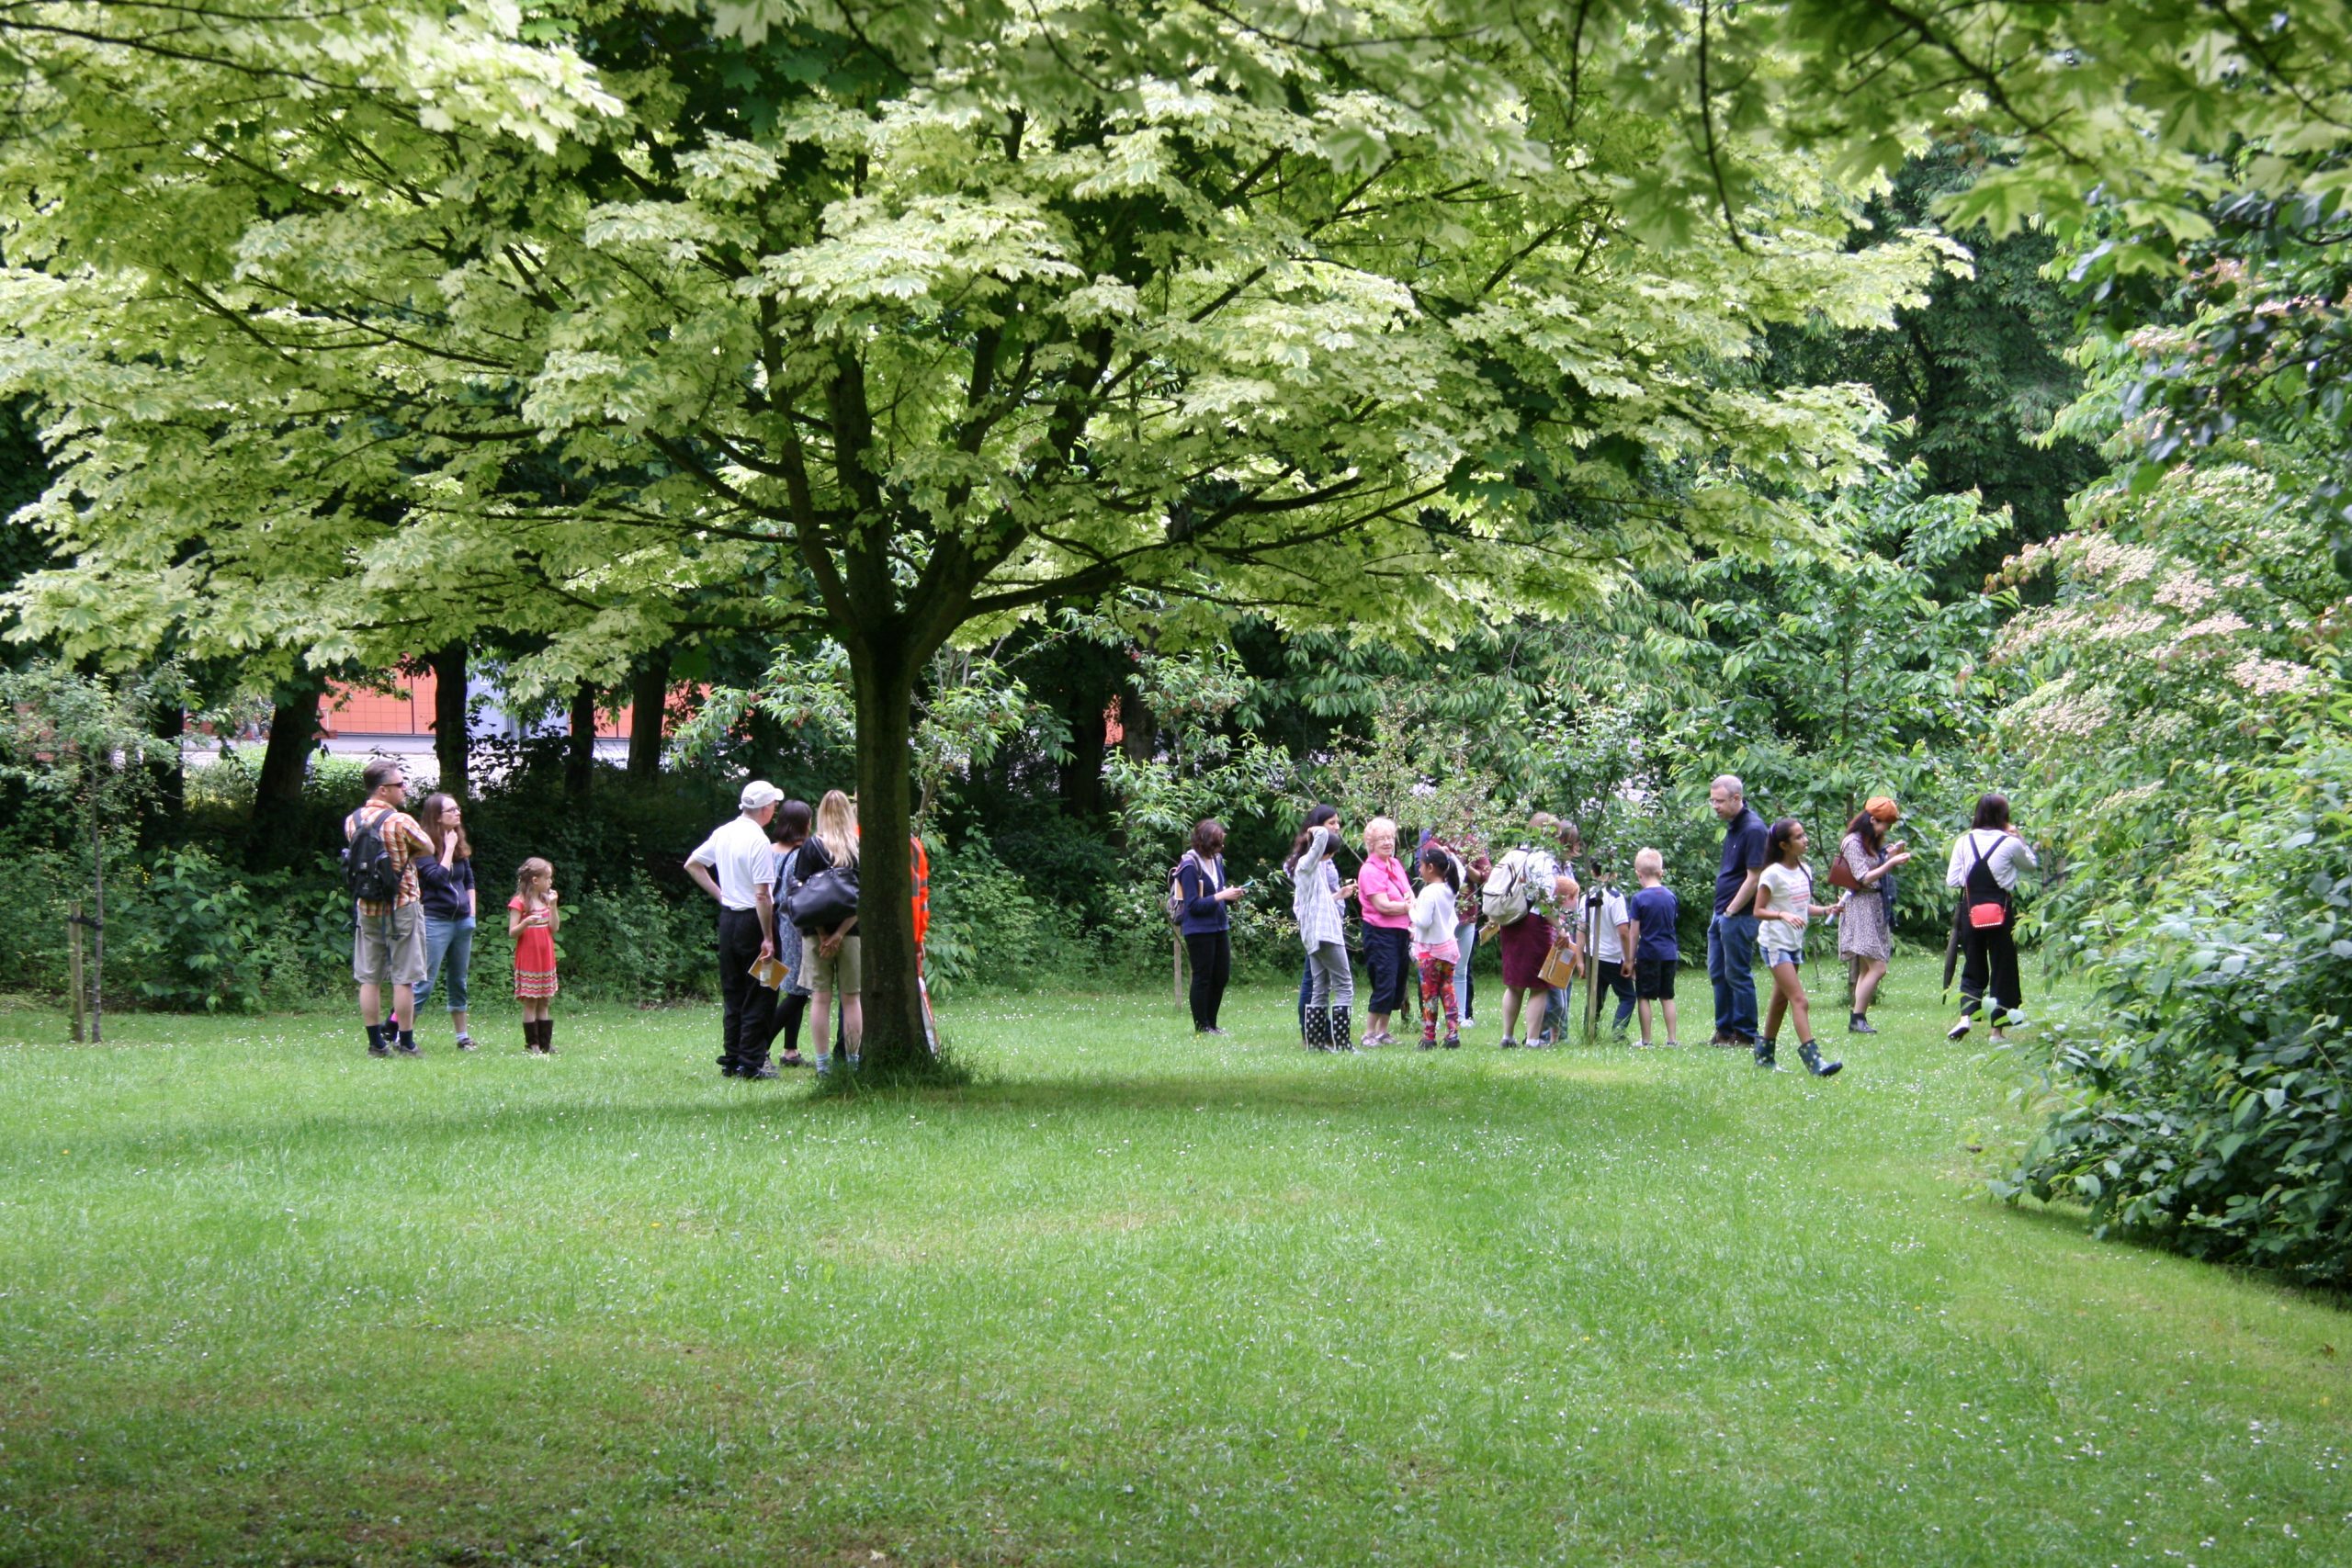 A group of people gathered under a tree.